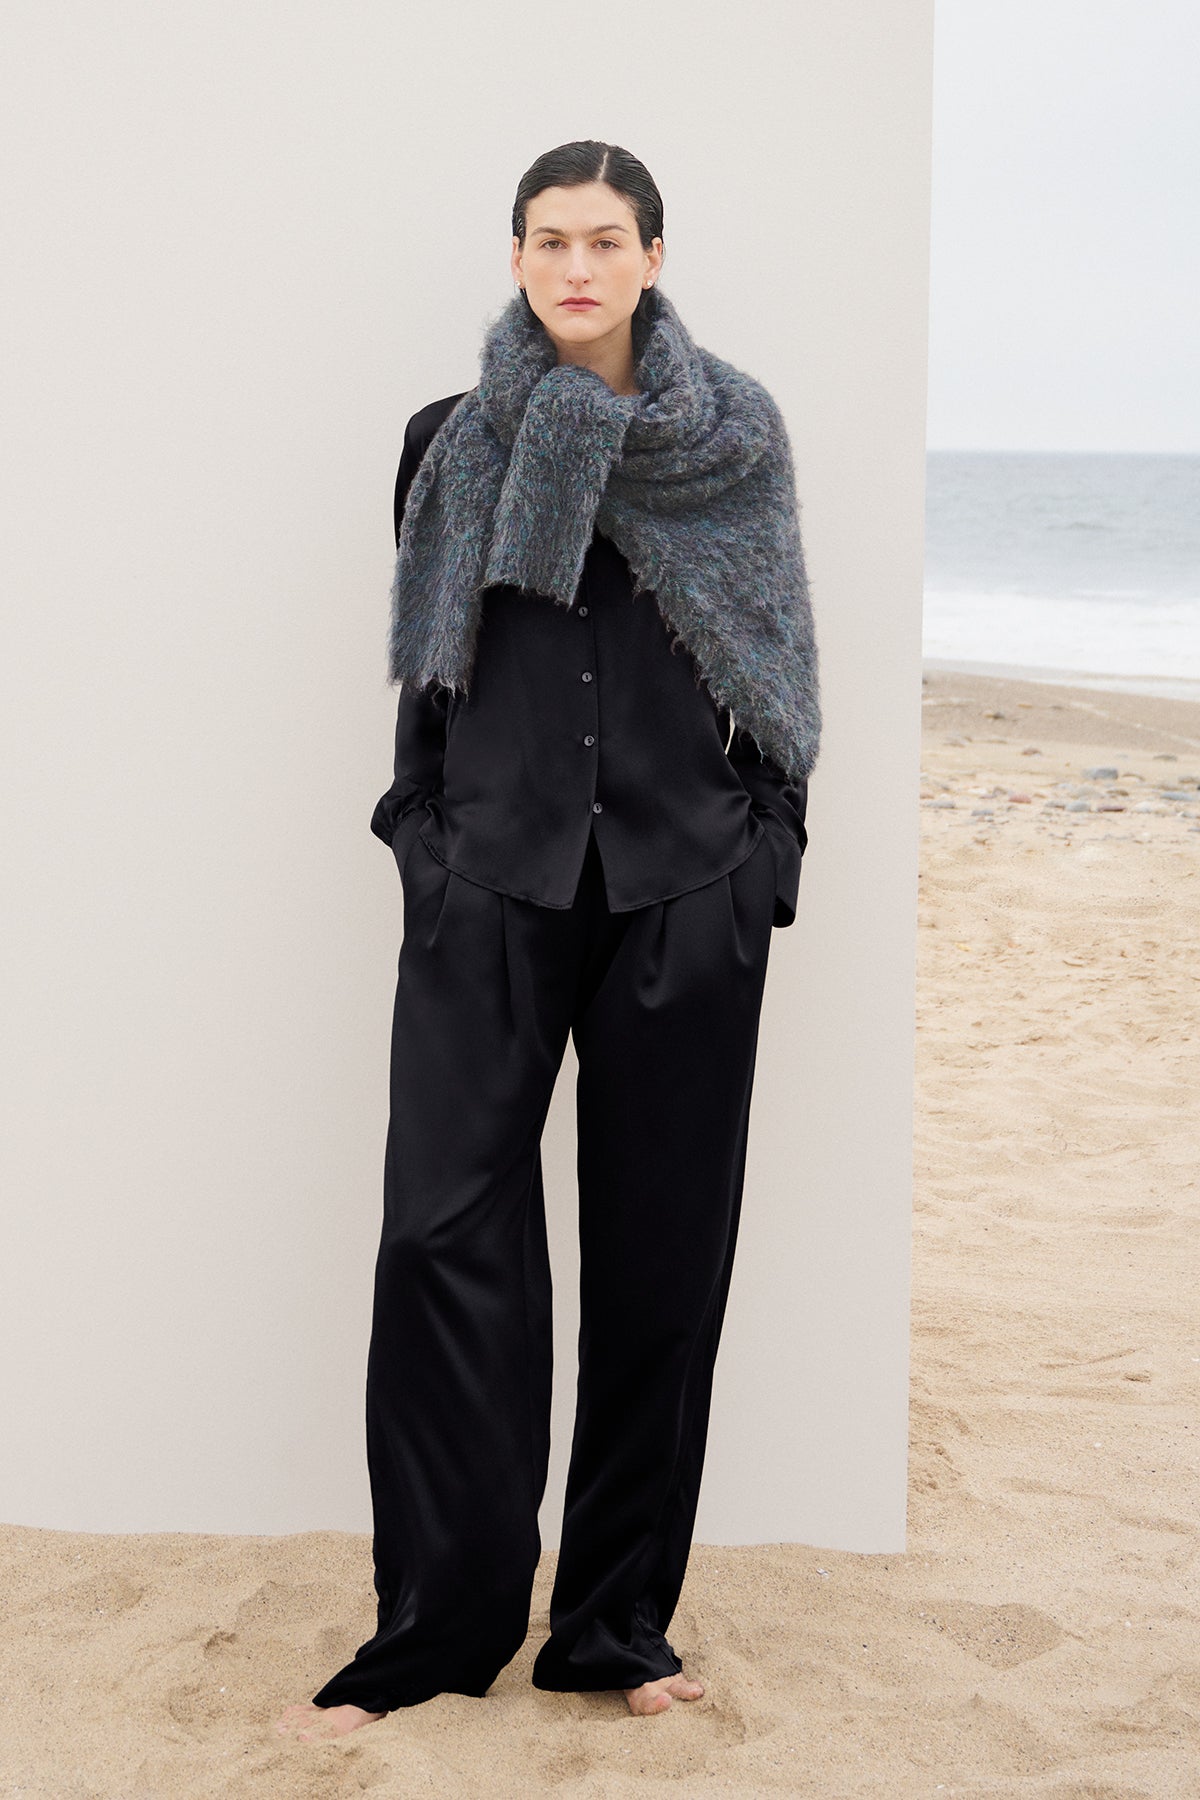 A woman wearing Velvet by Jenny Graham's timeless black pants and a scarf on the beach.-35547961065665